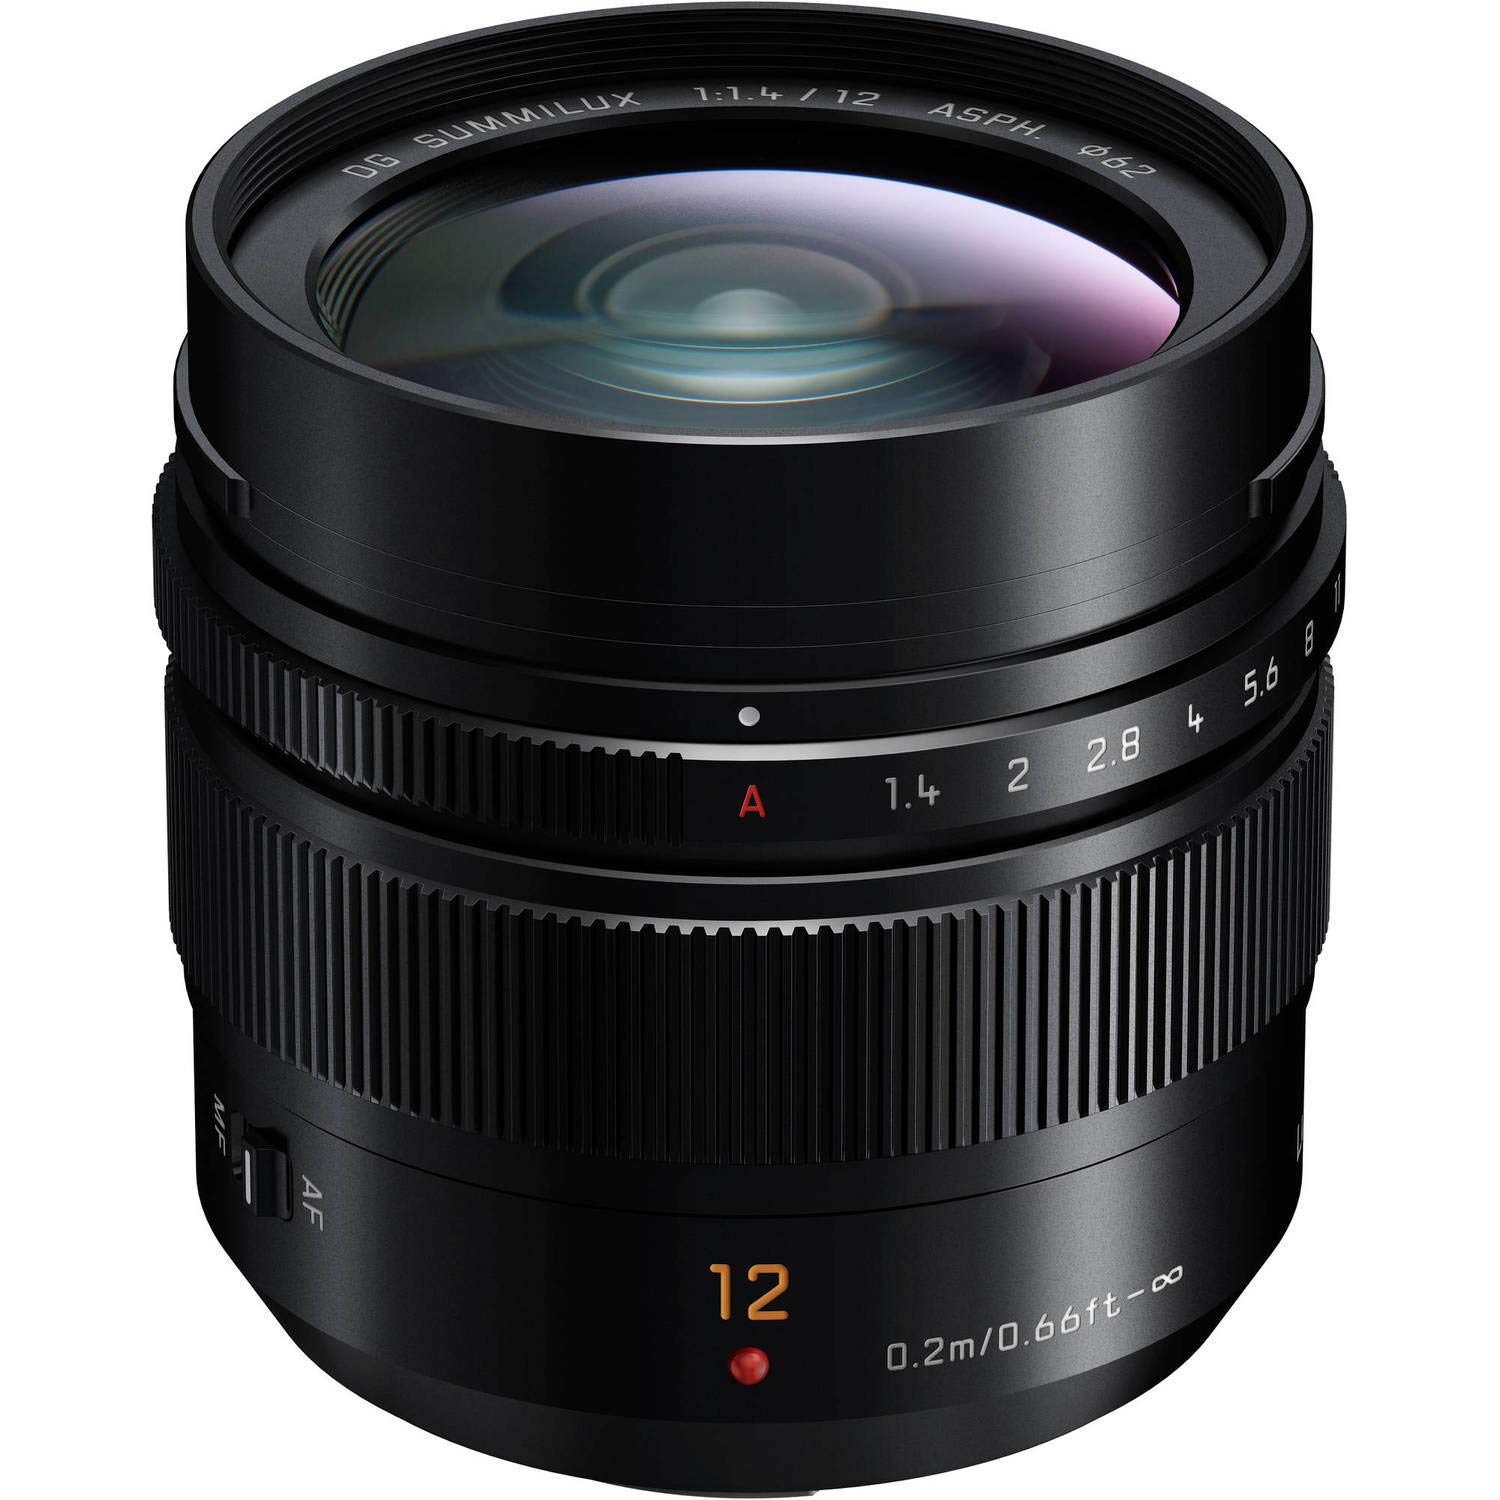 Panasonic Leica DG Summilux 12mm f/1.4 ASPH. Lens with Filter Kit, Lens Case, Cleaning Kit and Extended Warranty